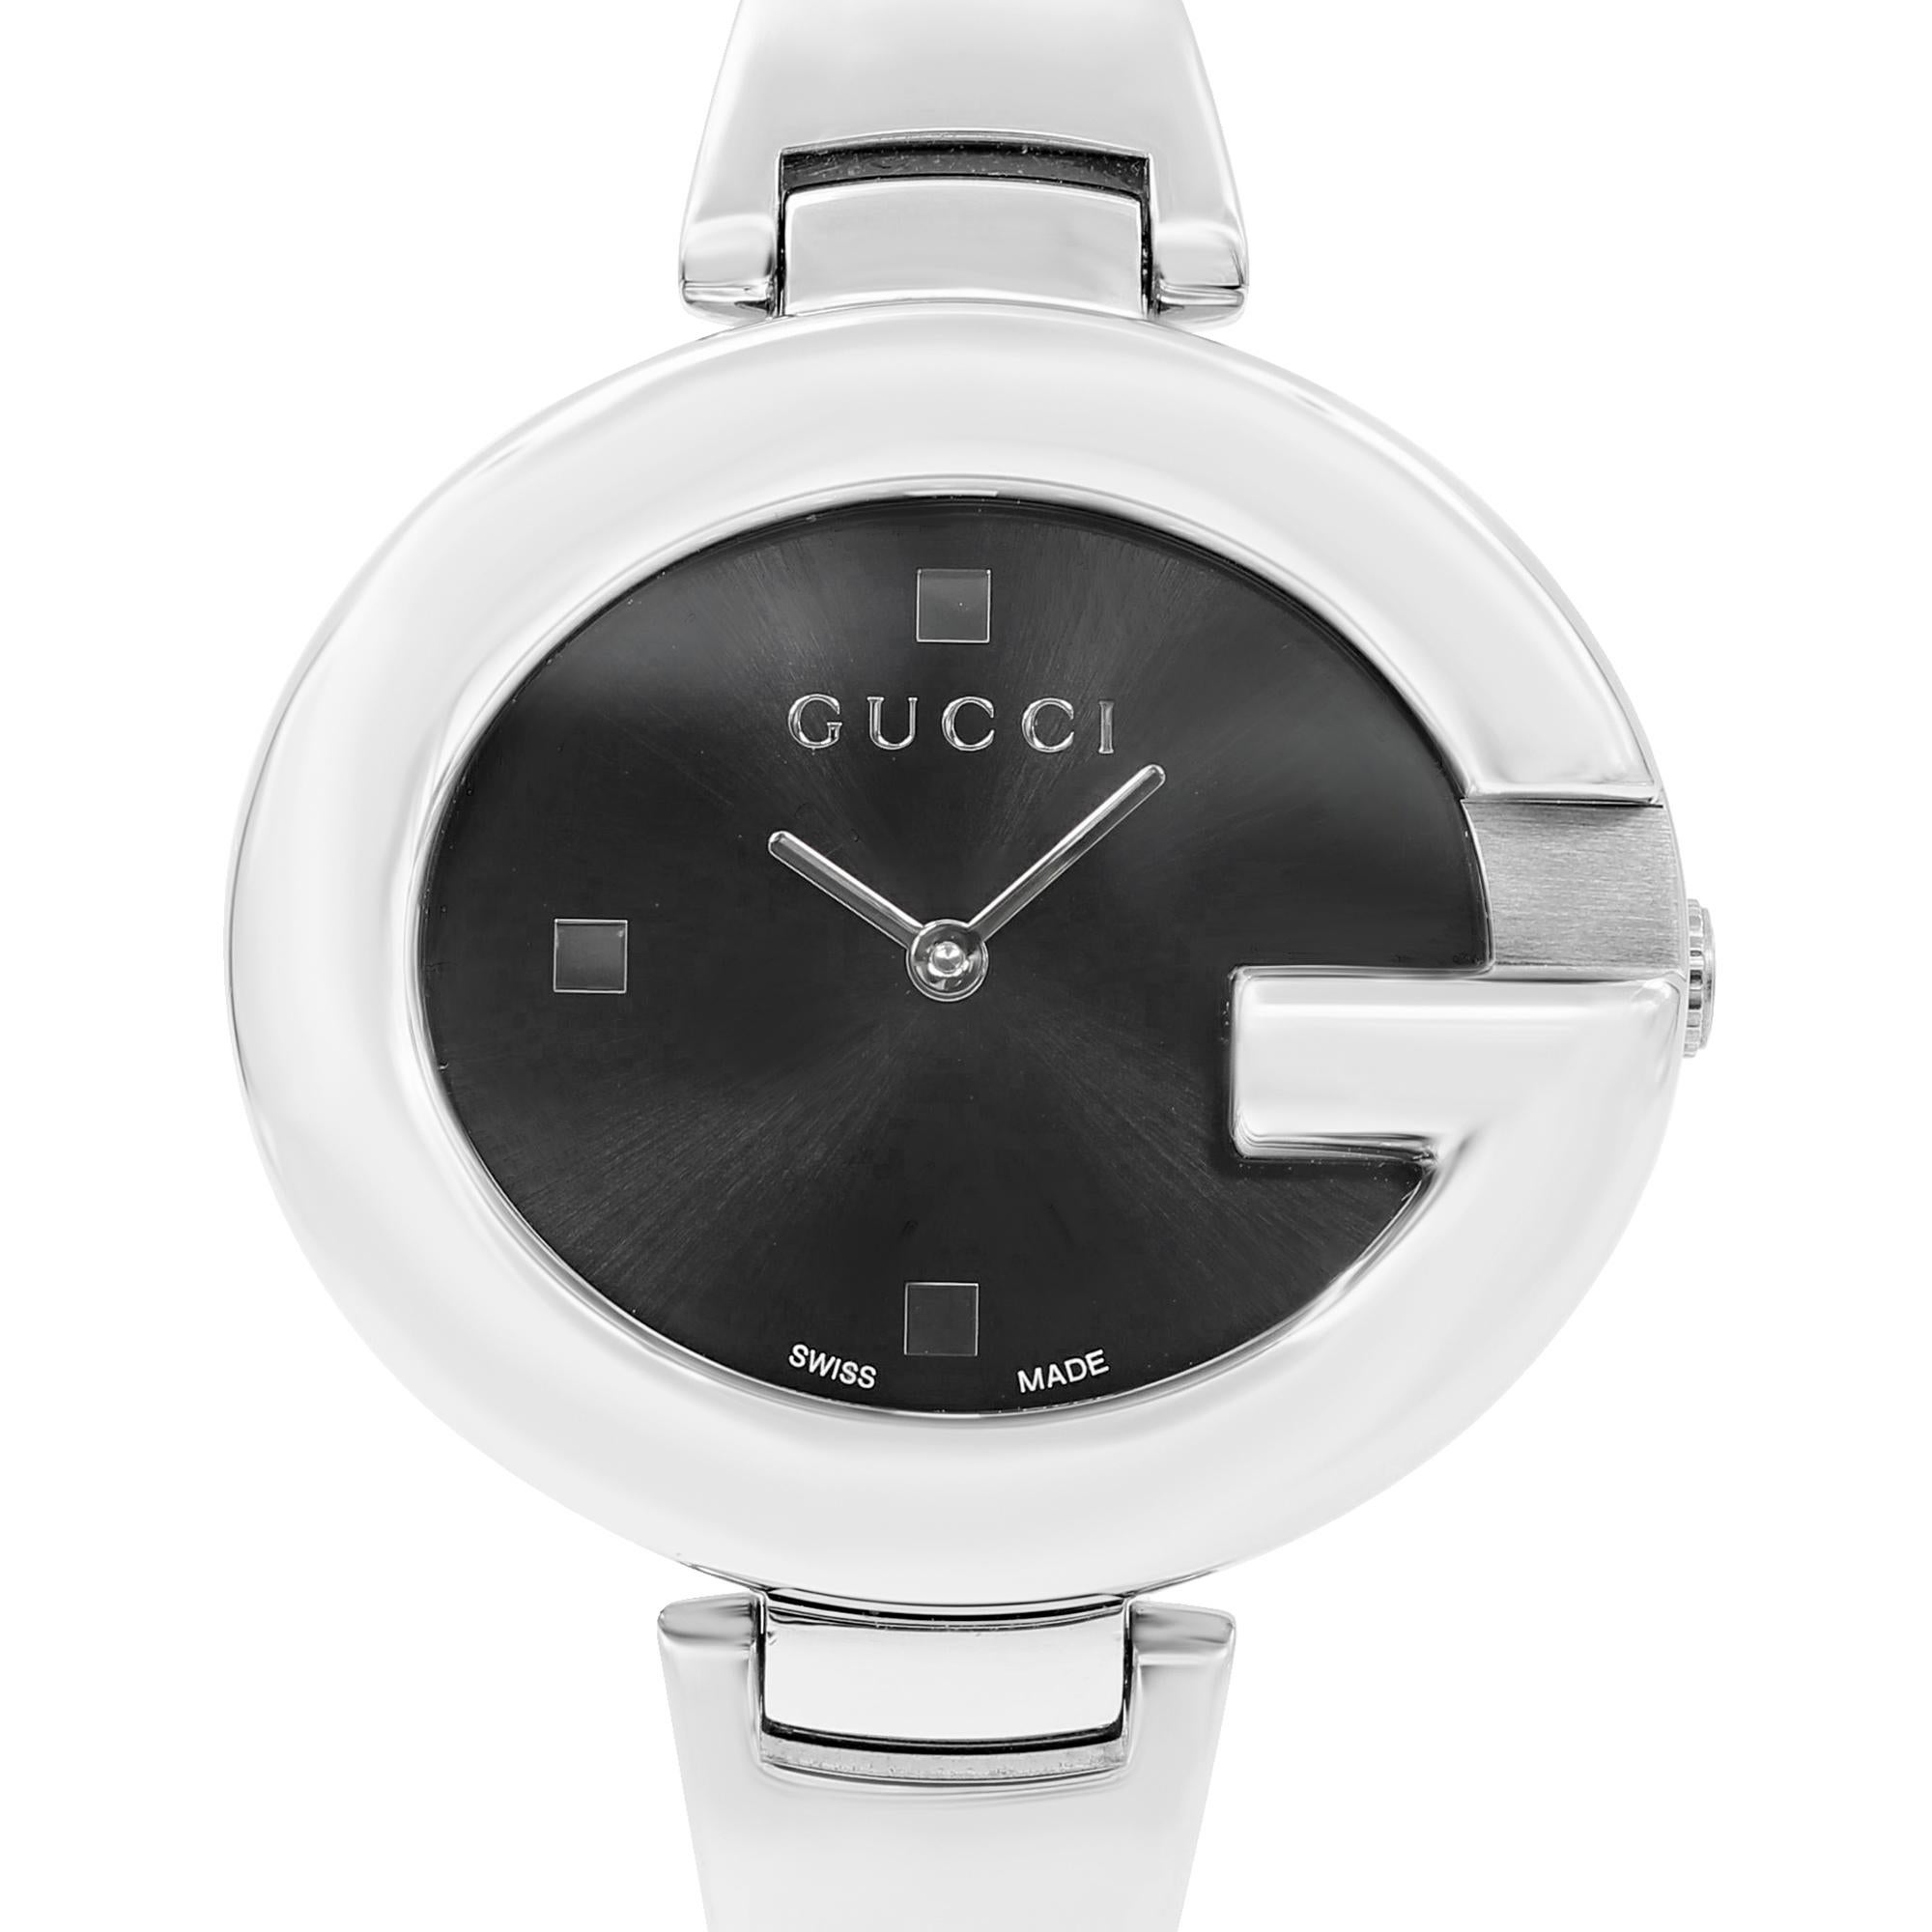 This pre-owned Gucci Guccissima  YA134301 is a beautiful Ladie's timepiece that is powered by quartz (battery) movement which is cased in a stainless steel case. It has a oval shape face, no features dial and has hand dots style markers. It is